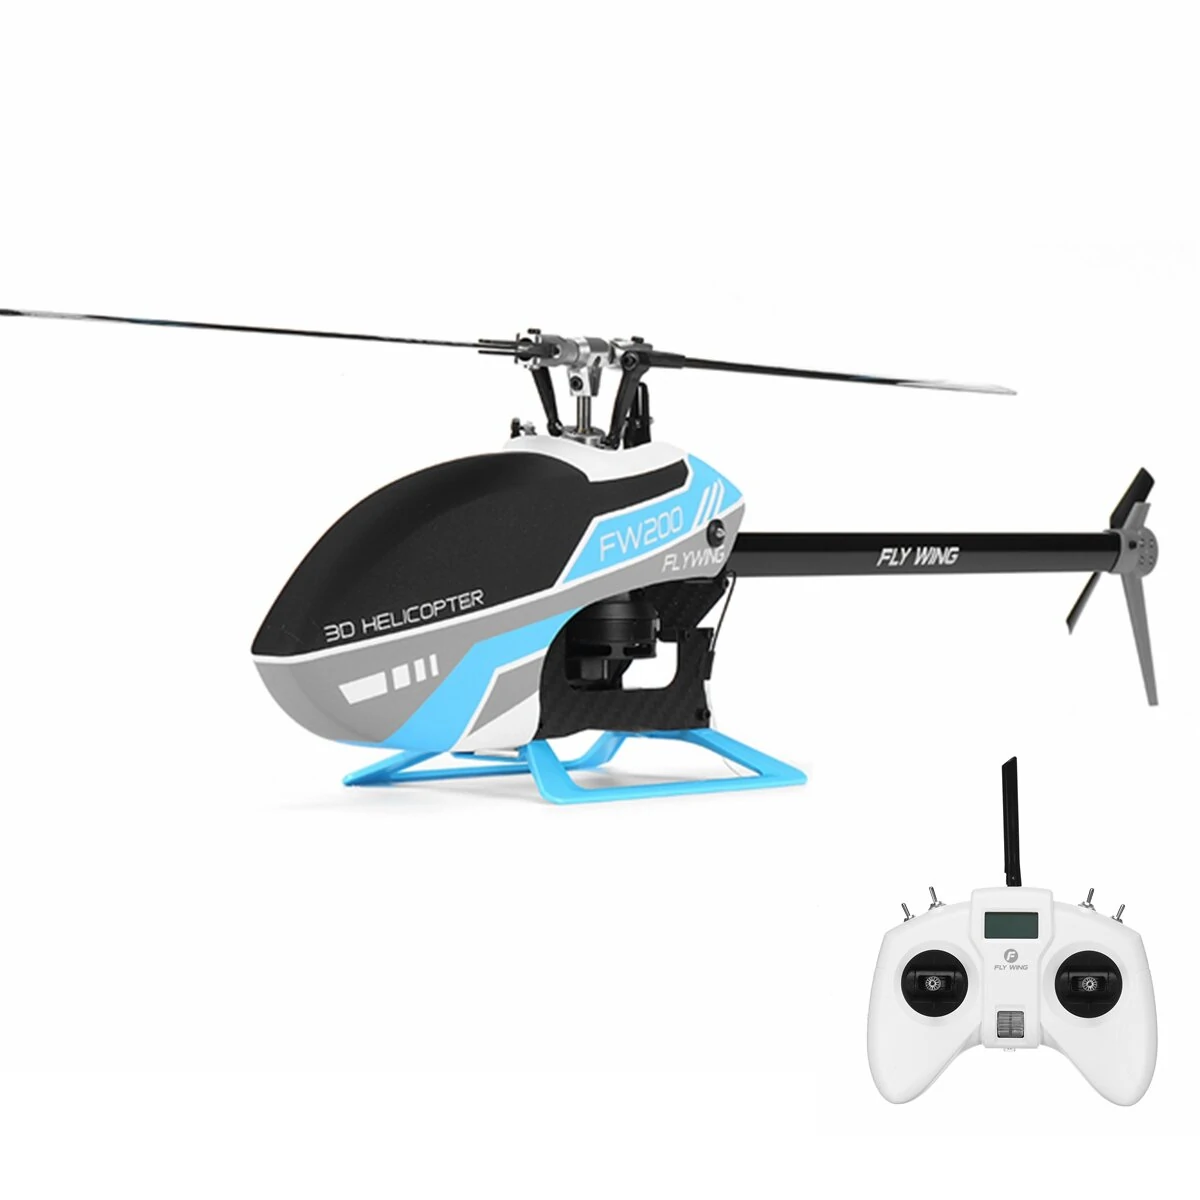 FLY WING FW200 6CH 3D Acrobatics GPS Altitude Hold One key Return APP Adjust RC Helicopter RTF With H1 V2 Flight Control System